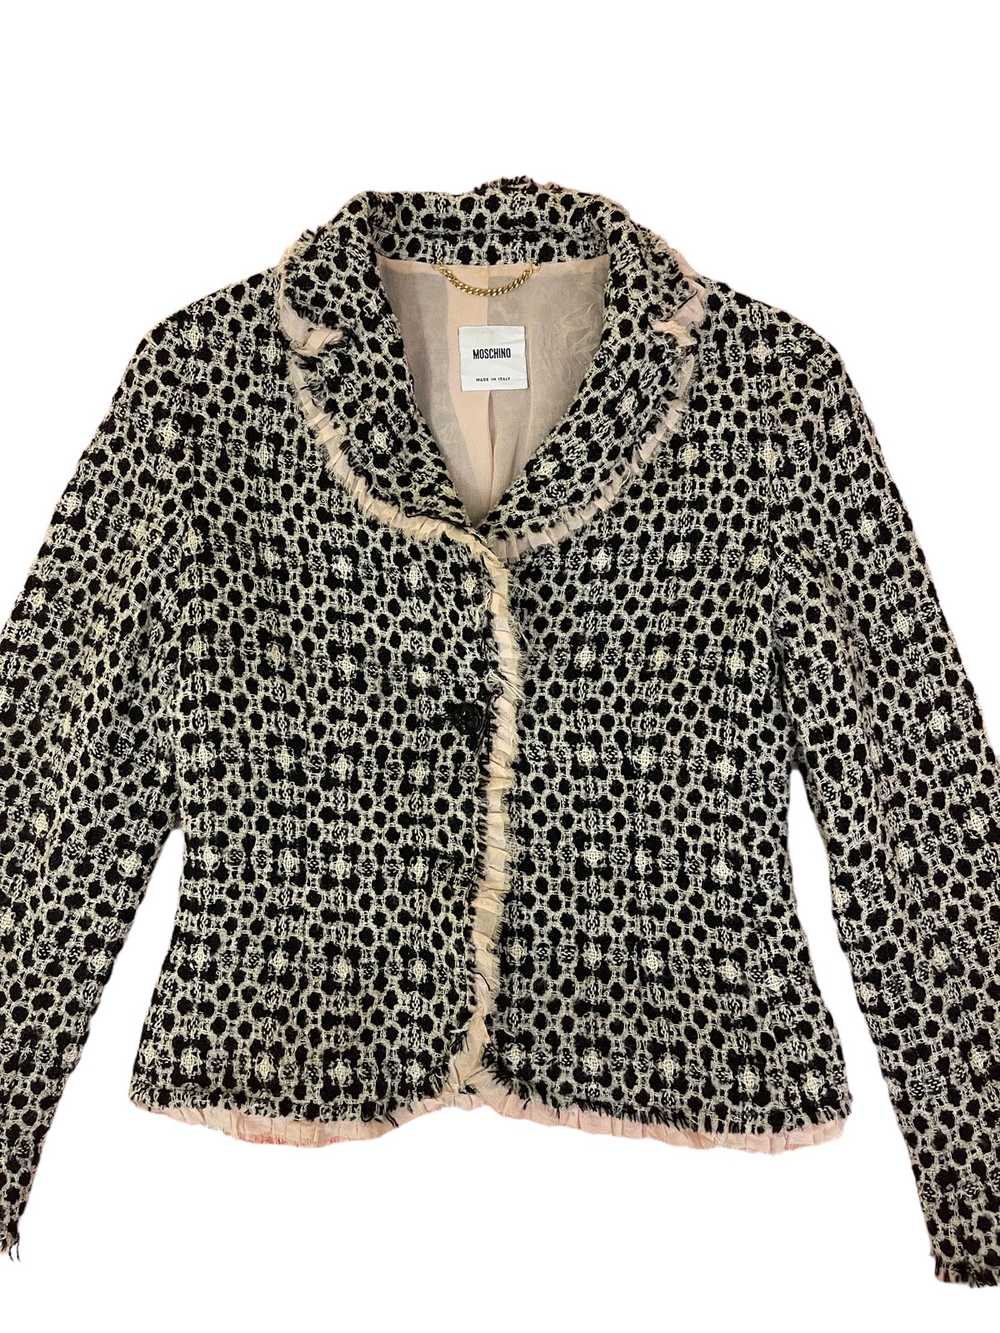 Moschino women jacket made in italy - image 5